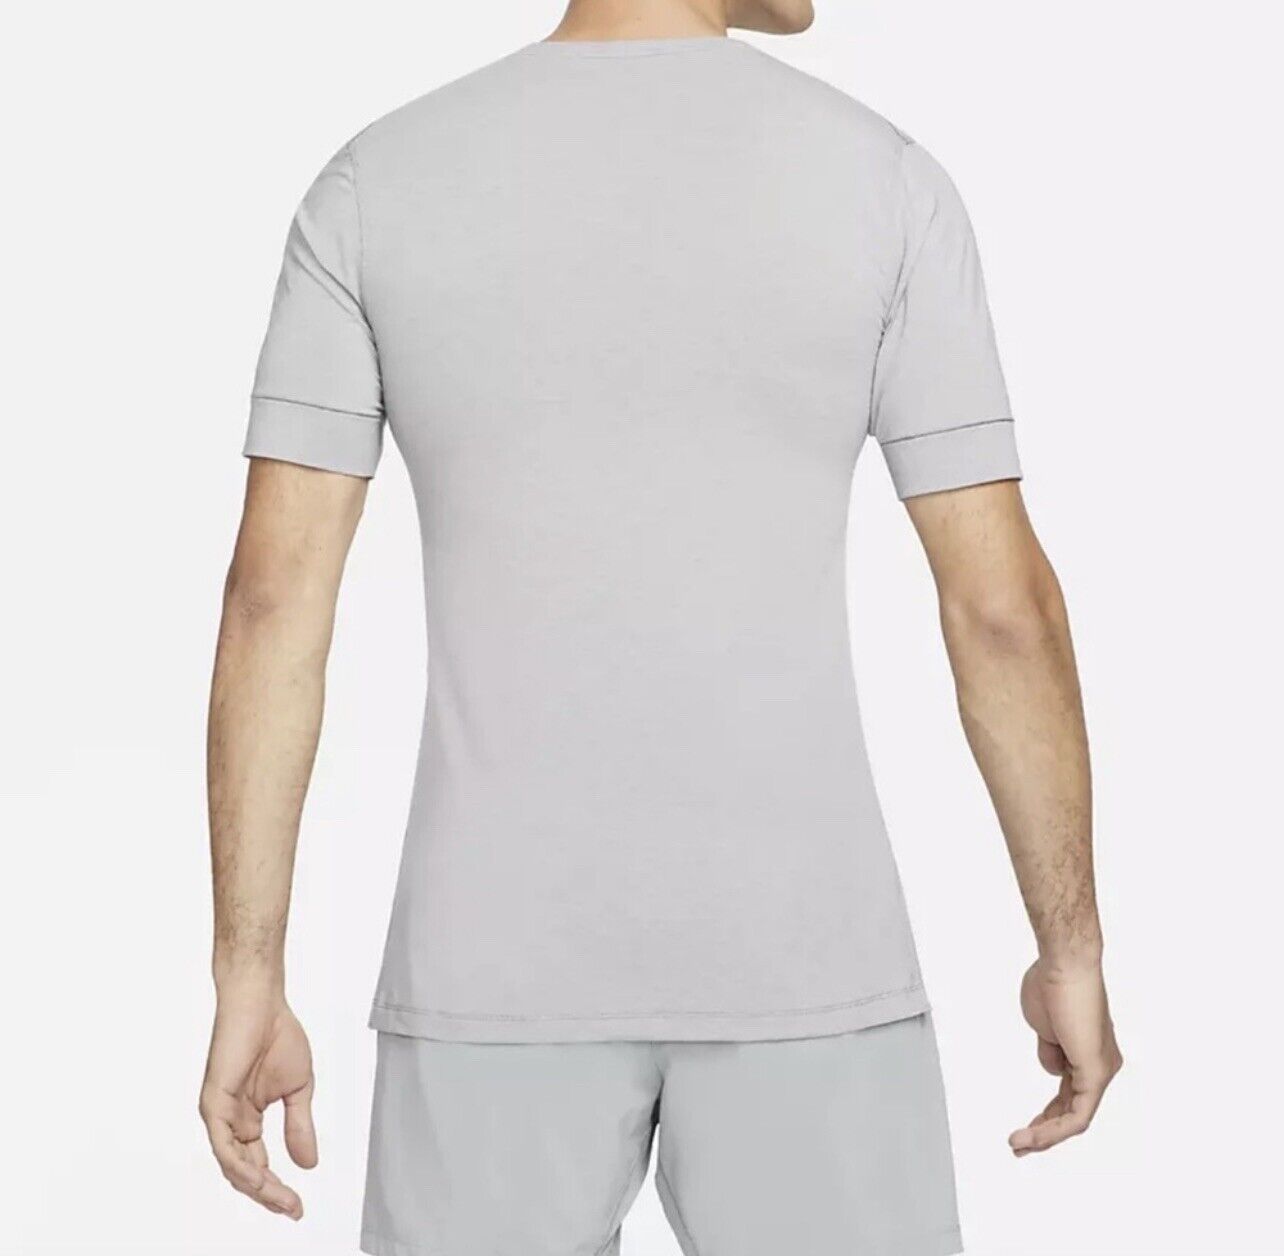 Men's Nike yoga shirt Dry-Fit T-Shirt Gray new with tags CN9822-077 yoga  gray